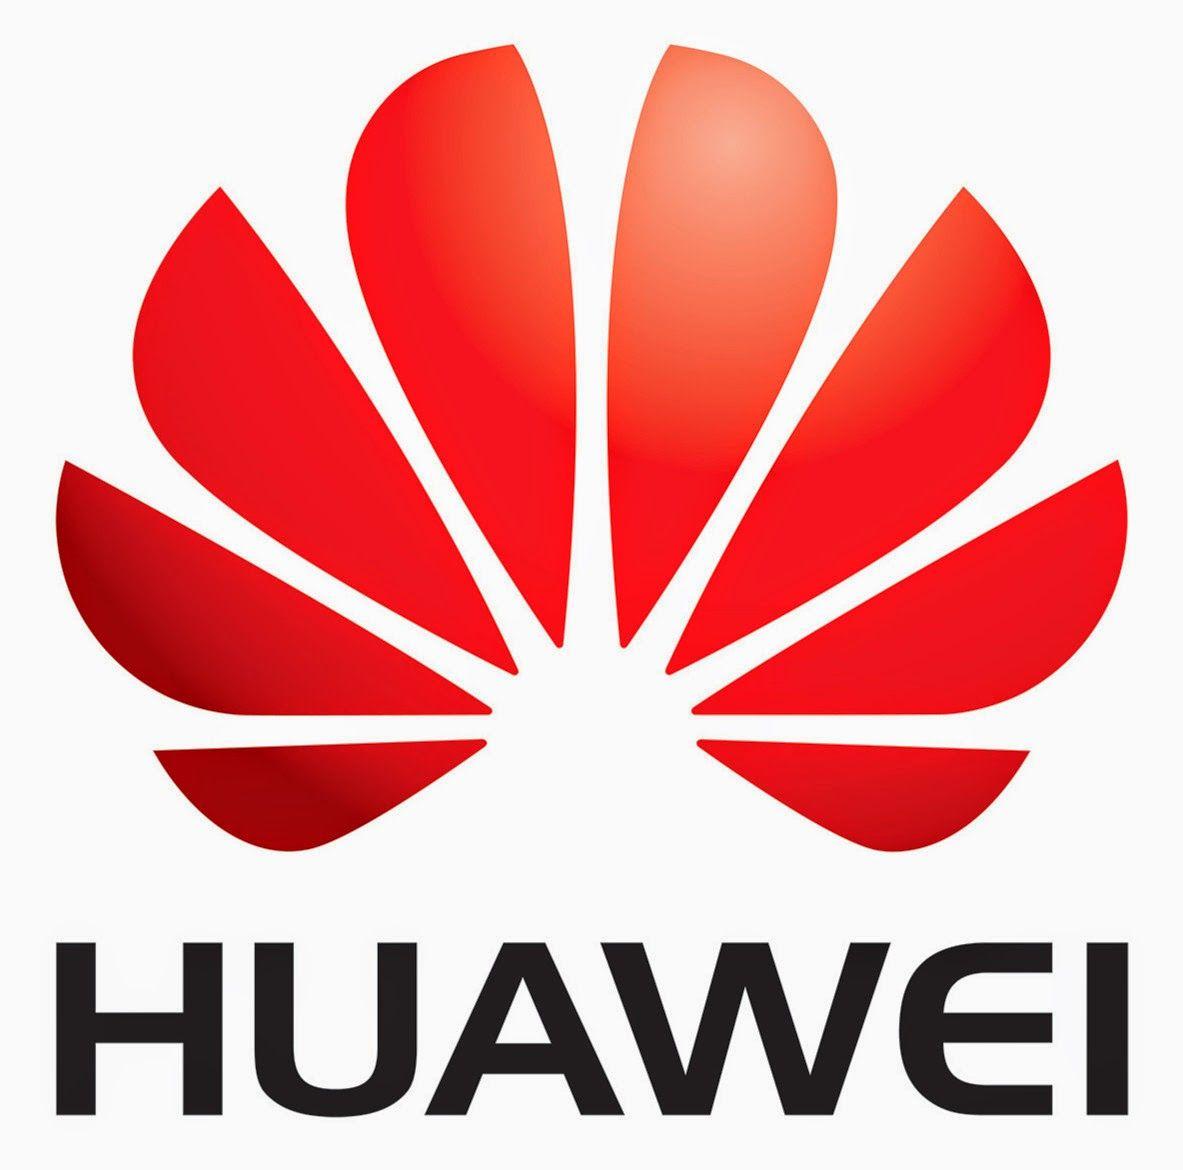 Phone Brand Logo - Amazing Huawei Brand Logos Images With Names | Brand Logos Pictures ...